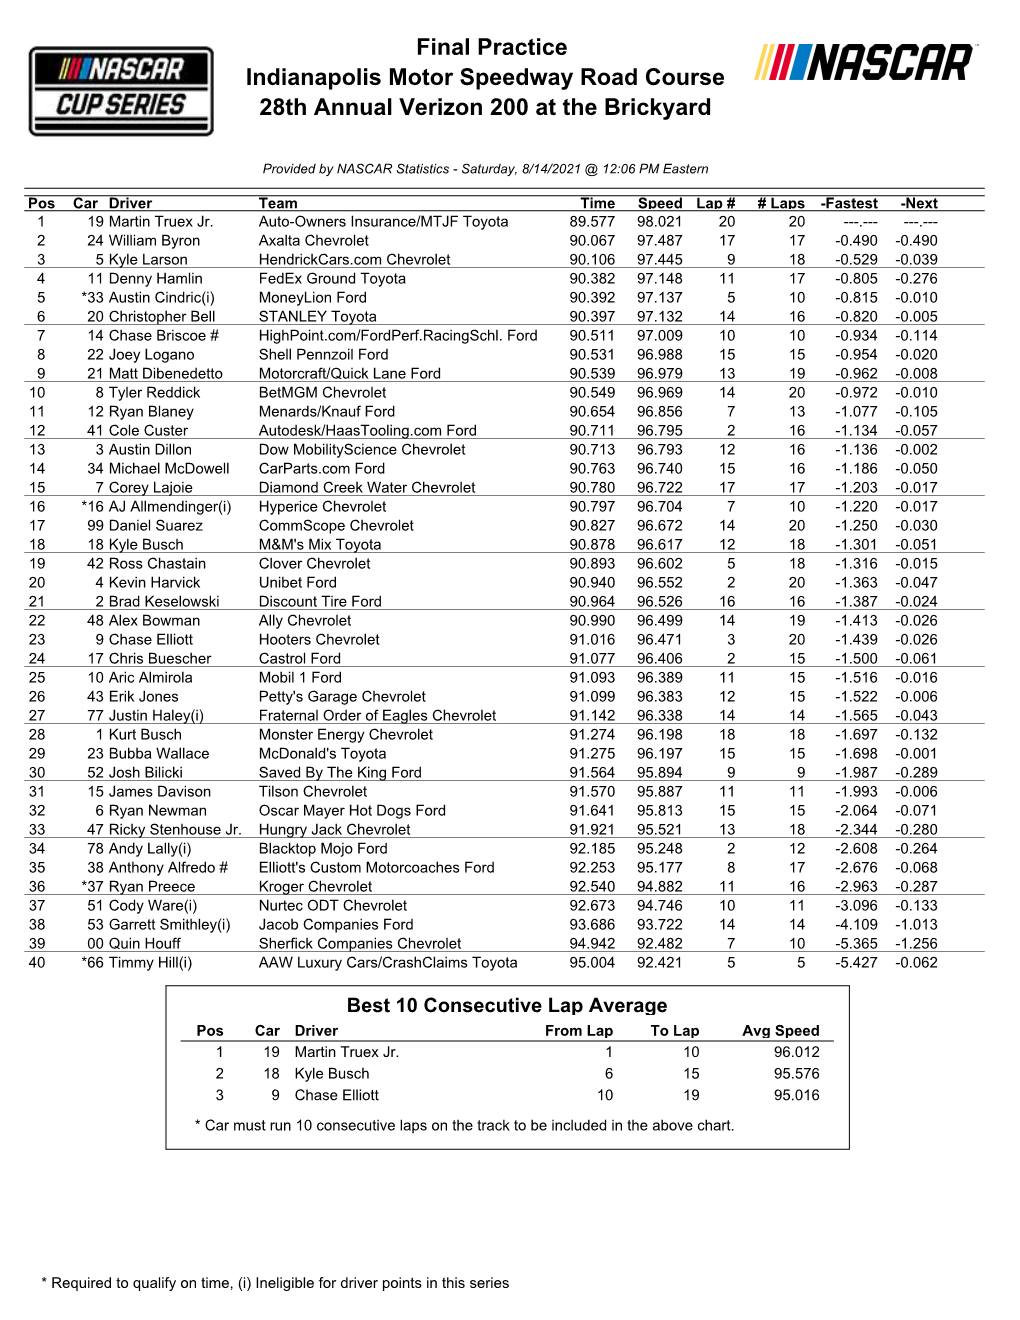 Final Practice Indianapolis Motor Speedway Road Course 28Th Annual Verizon 200 at the Brickyard